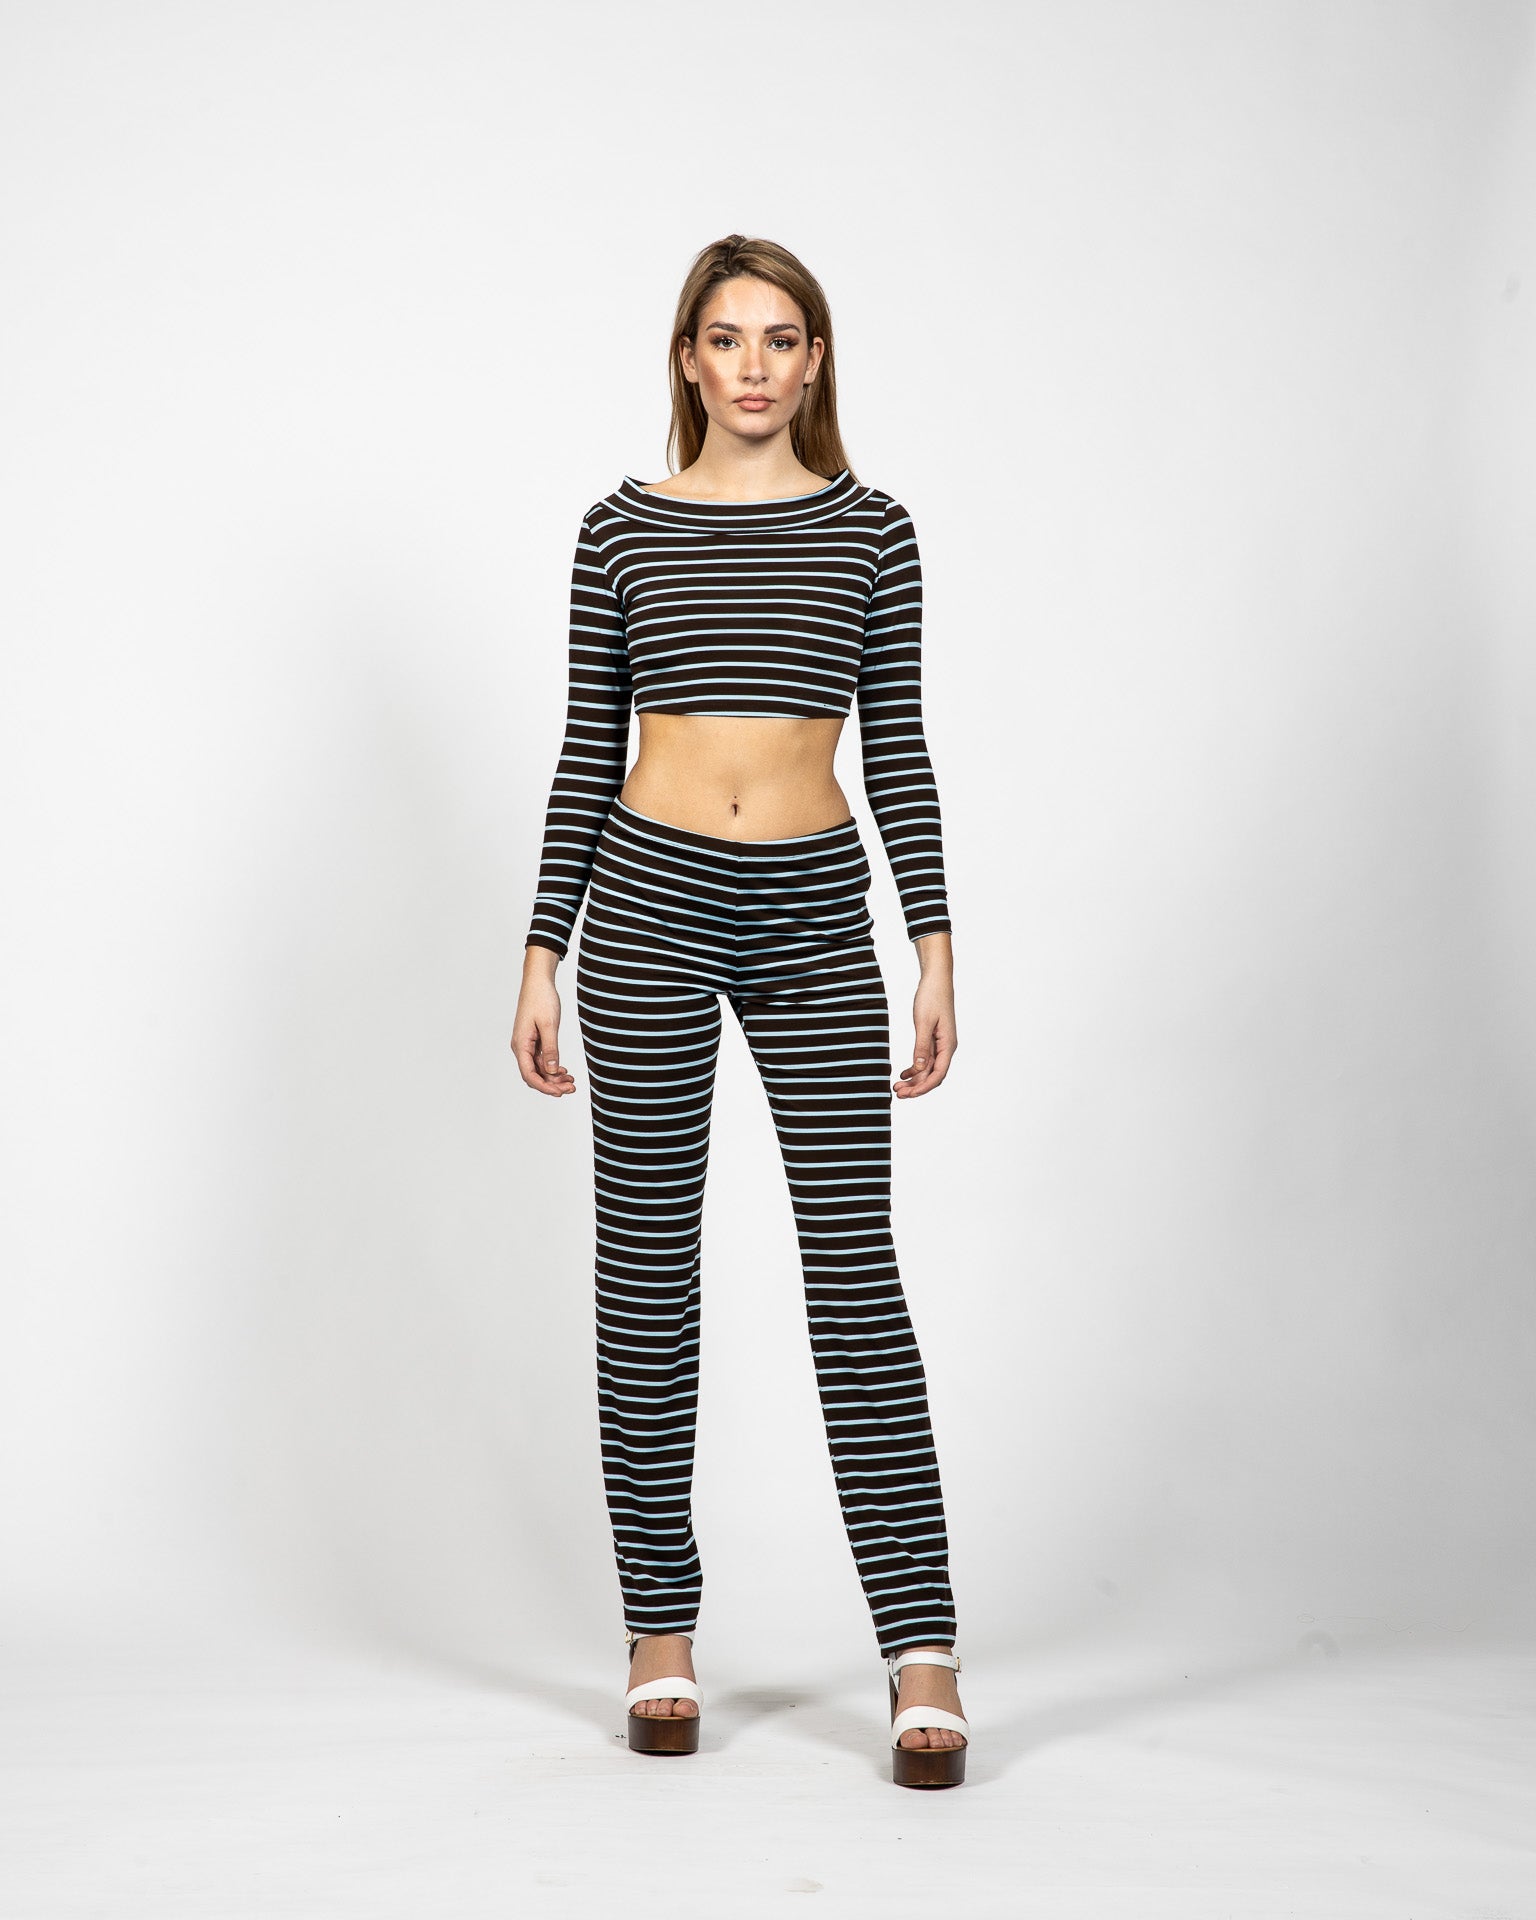 Printed Top With Matching Pants - Front View - Samuel Vartan